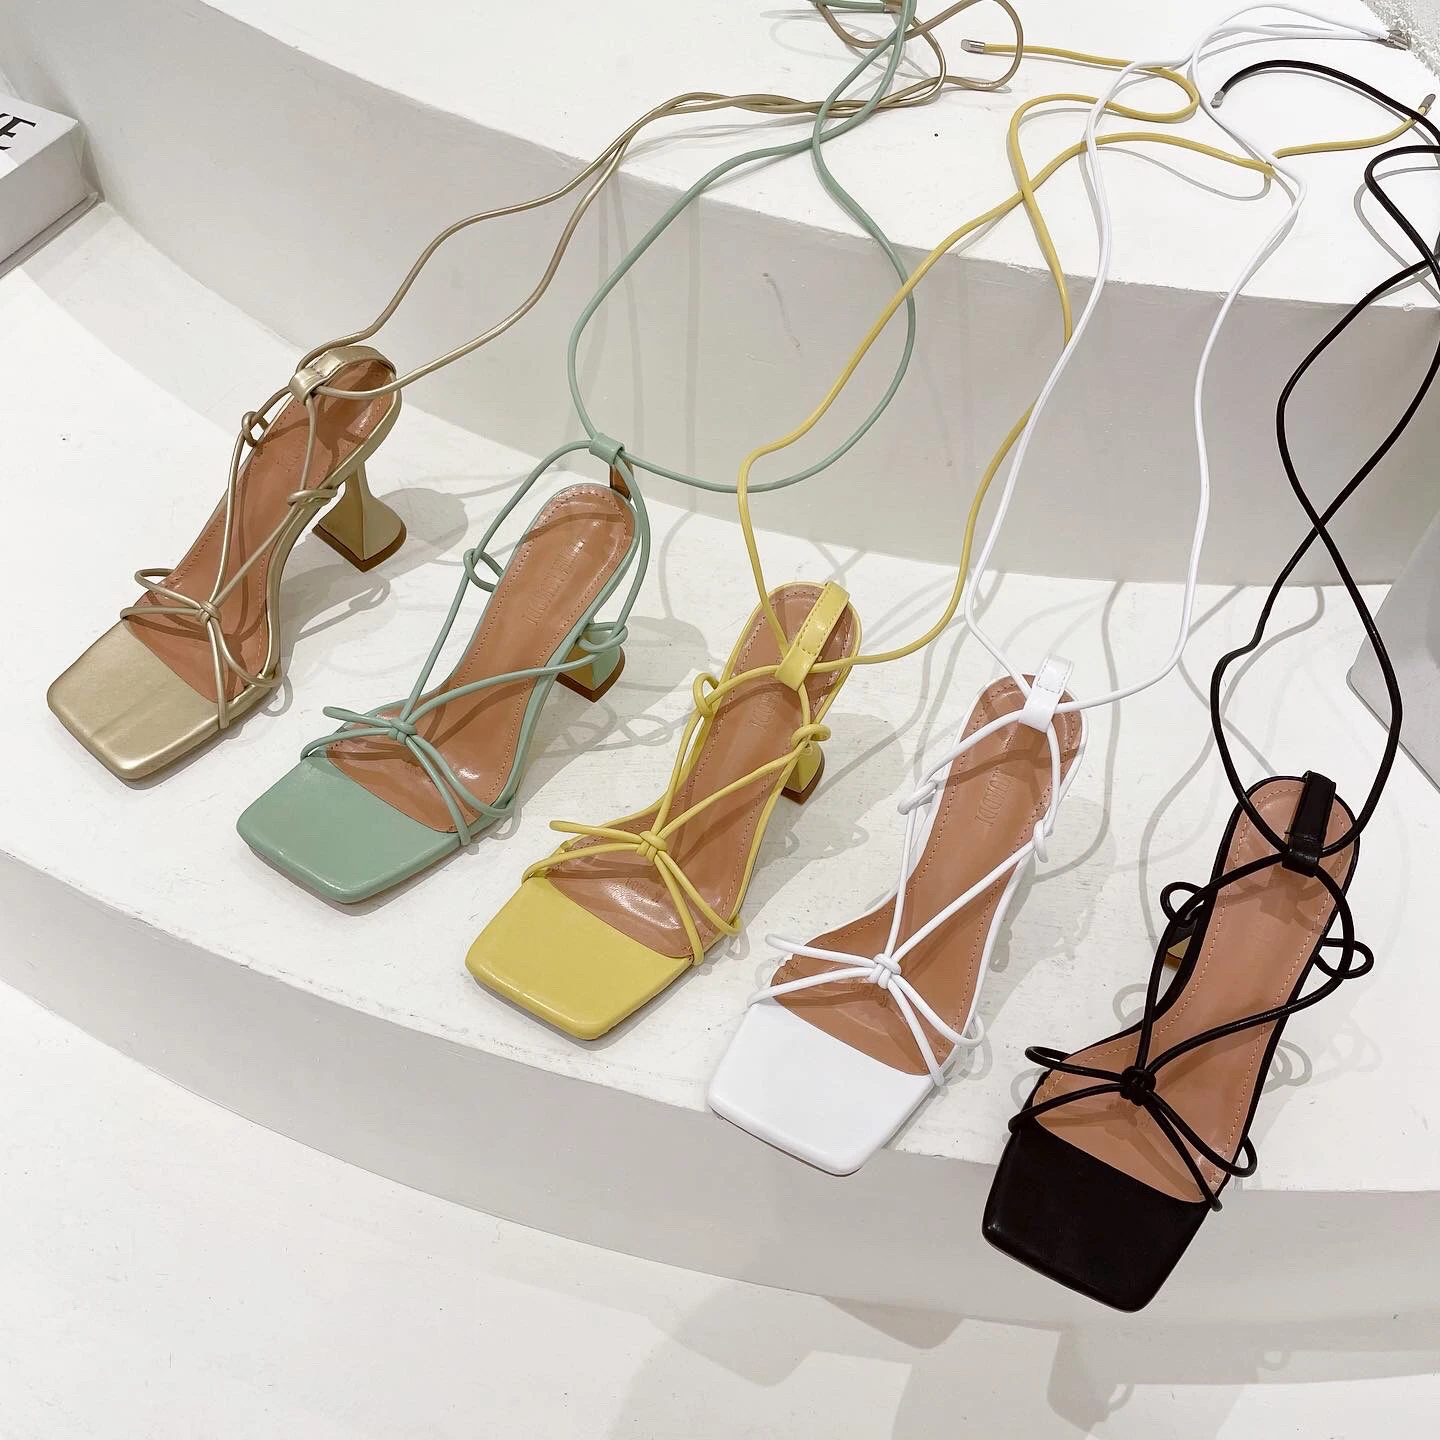 

Chaussures Talon Female Footwear Square Toe Strappy Sandal Shoes Lace up Sexy Heels, Green, yellow, white, black, gold